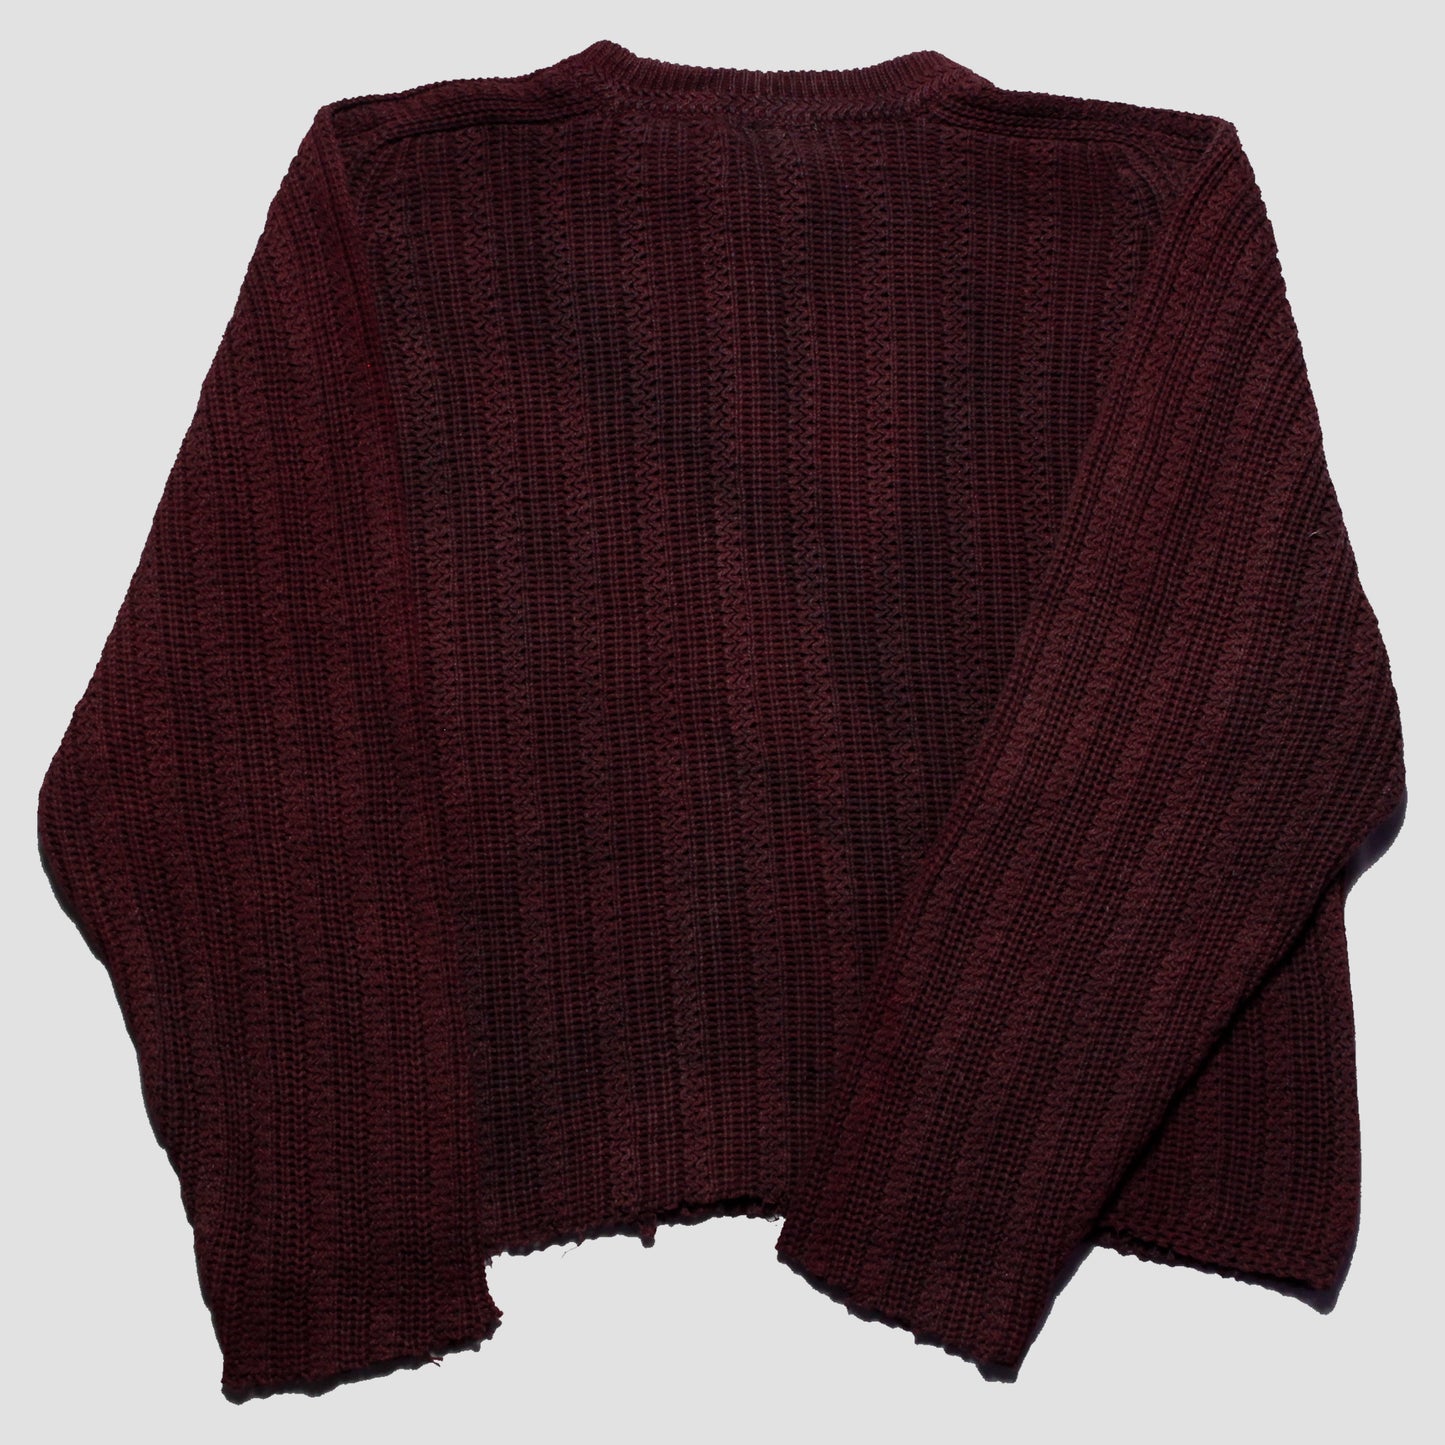 "BLOOD STAINED SWITCHBLADES" Cropped Knit Sweater (M)